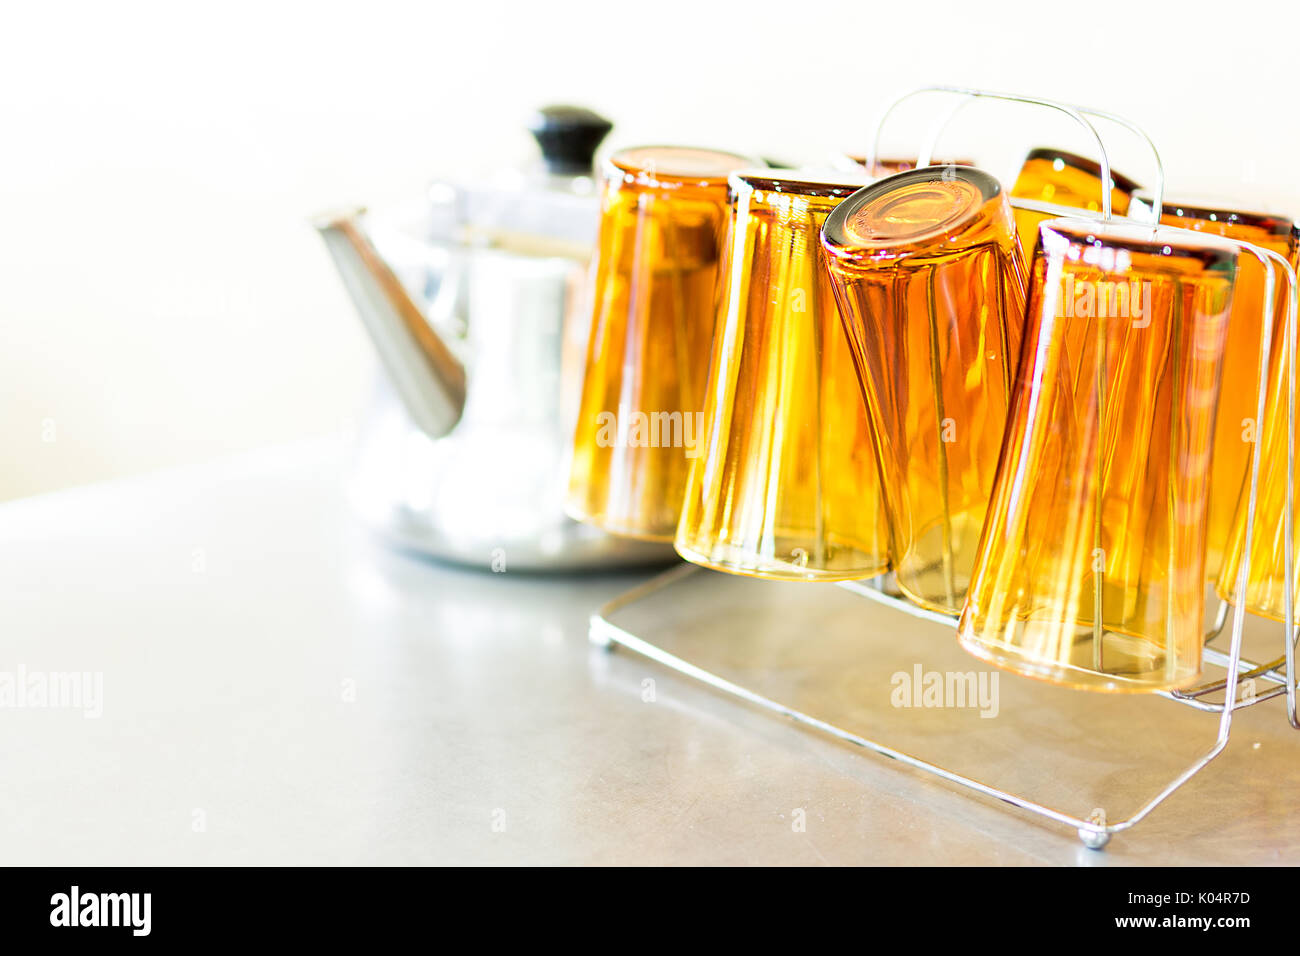 Brown chai / tea glasses on a holder next to a metal tea pot on a stainless steal table top in a restaurant. Stock Photo